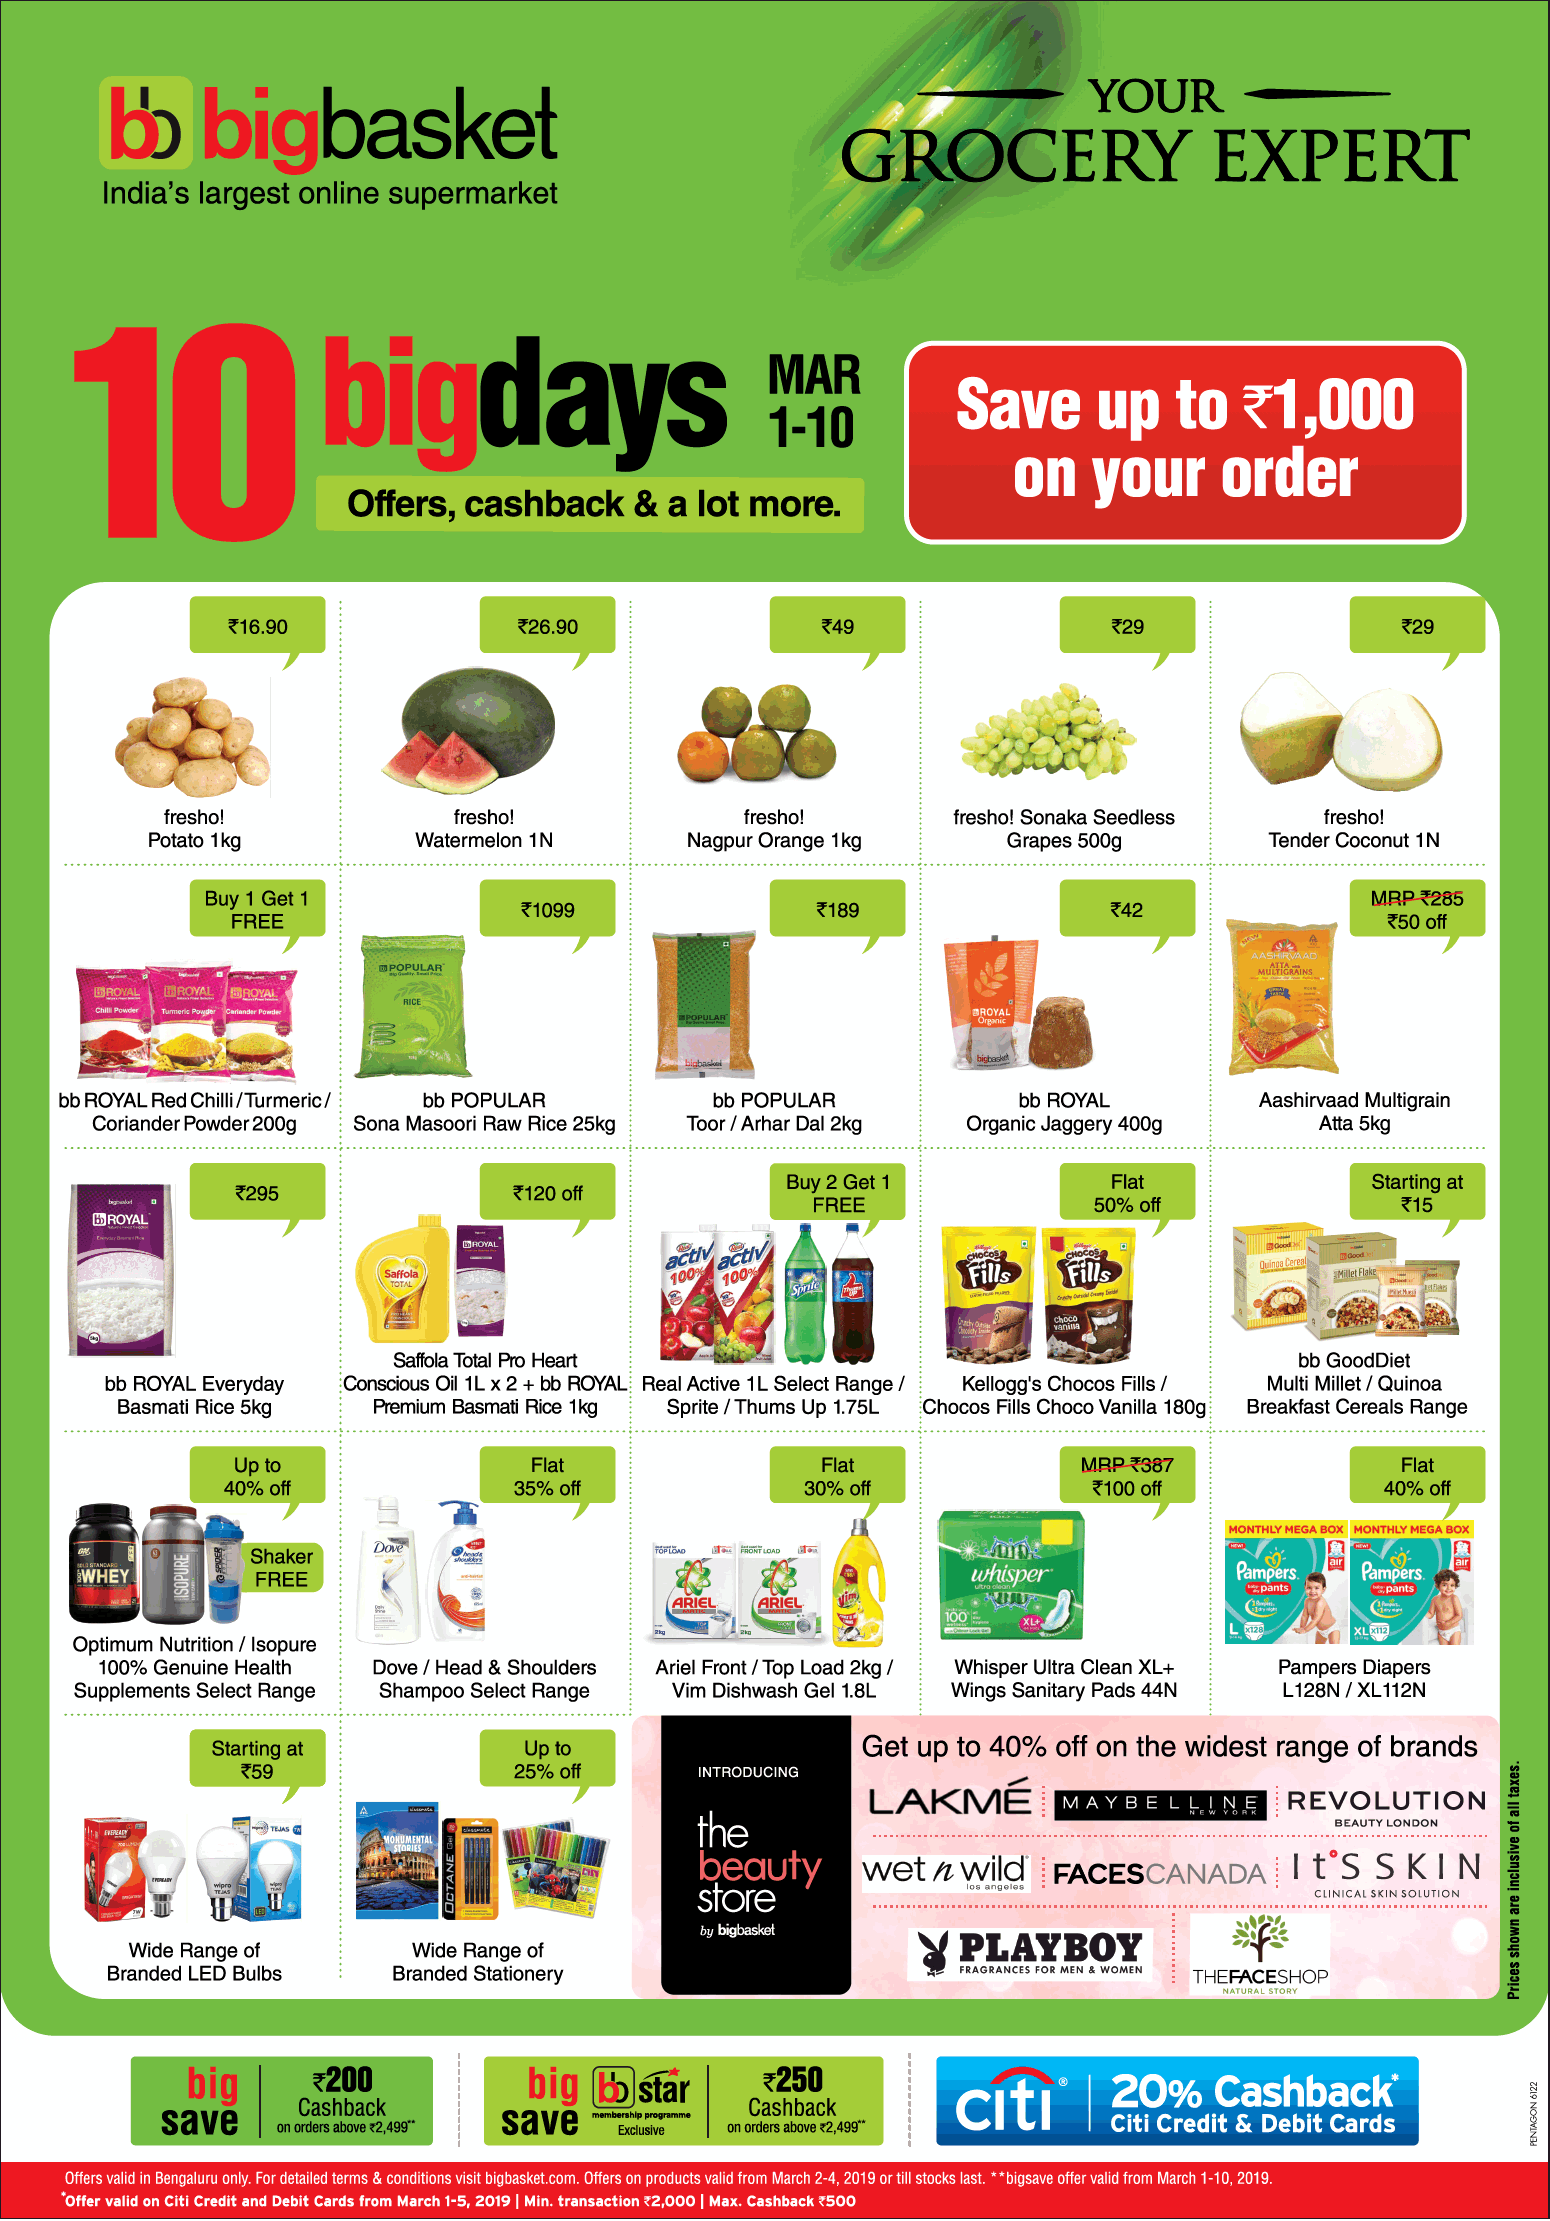 bigbasket-10-big-days-save-upto-rs-1000-on-your-order-ad-bangalore-times-02-03-2019.png